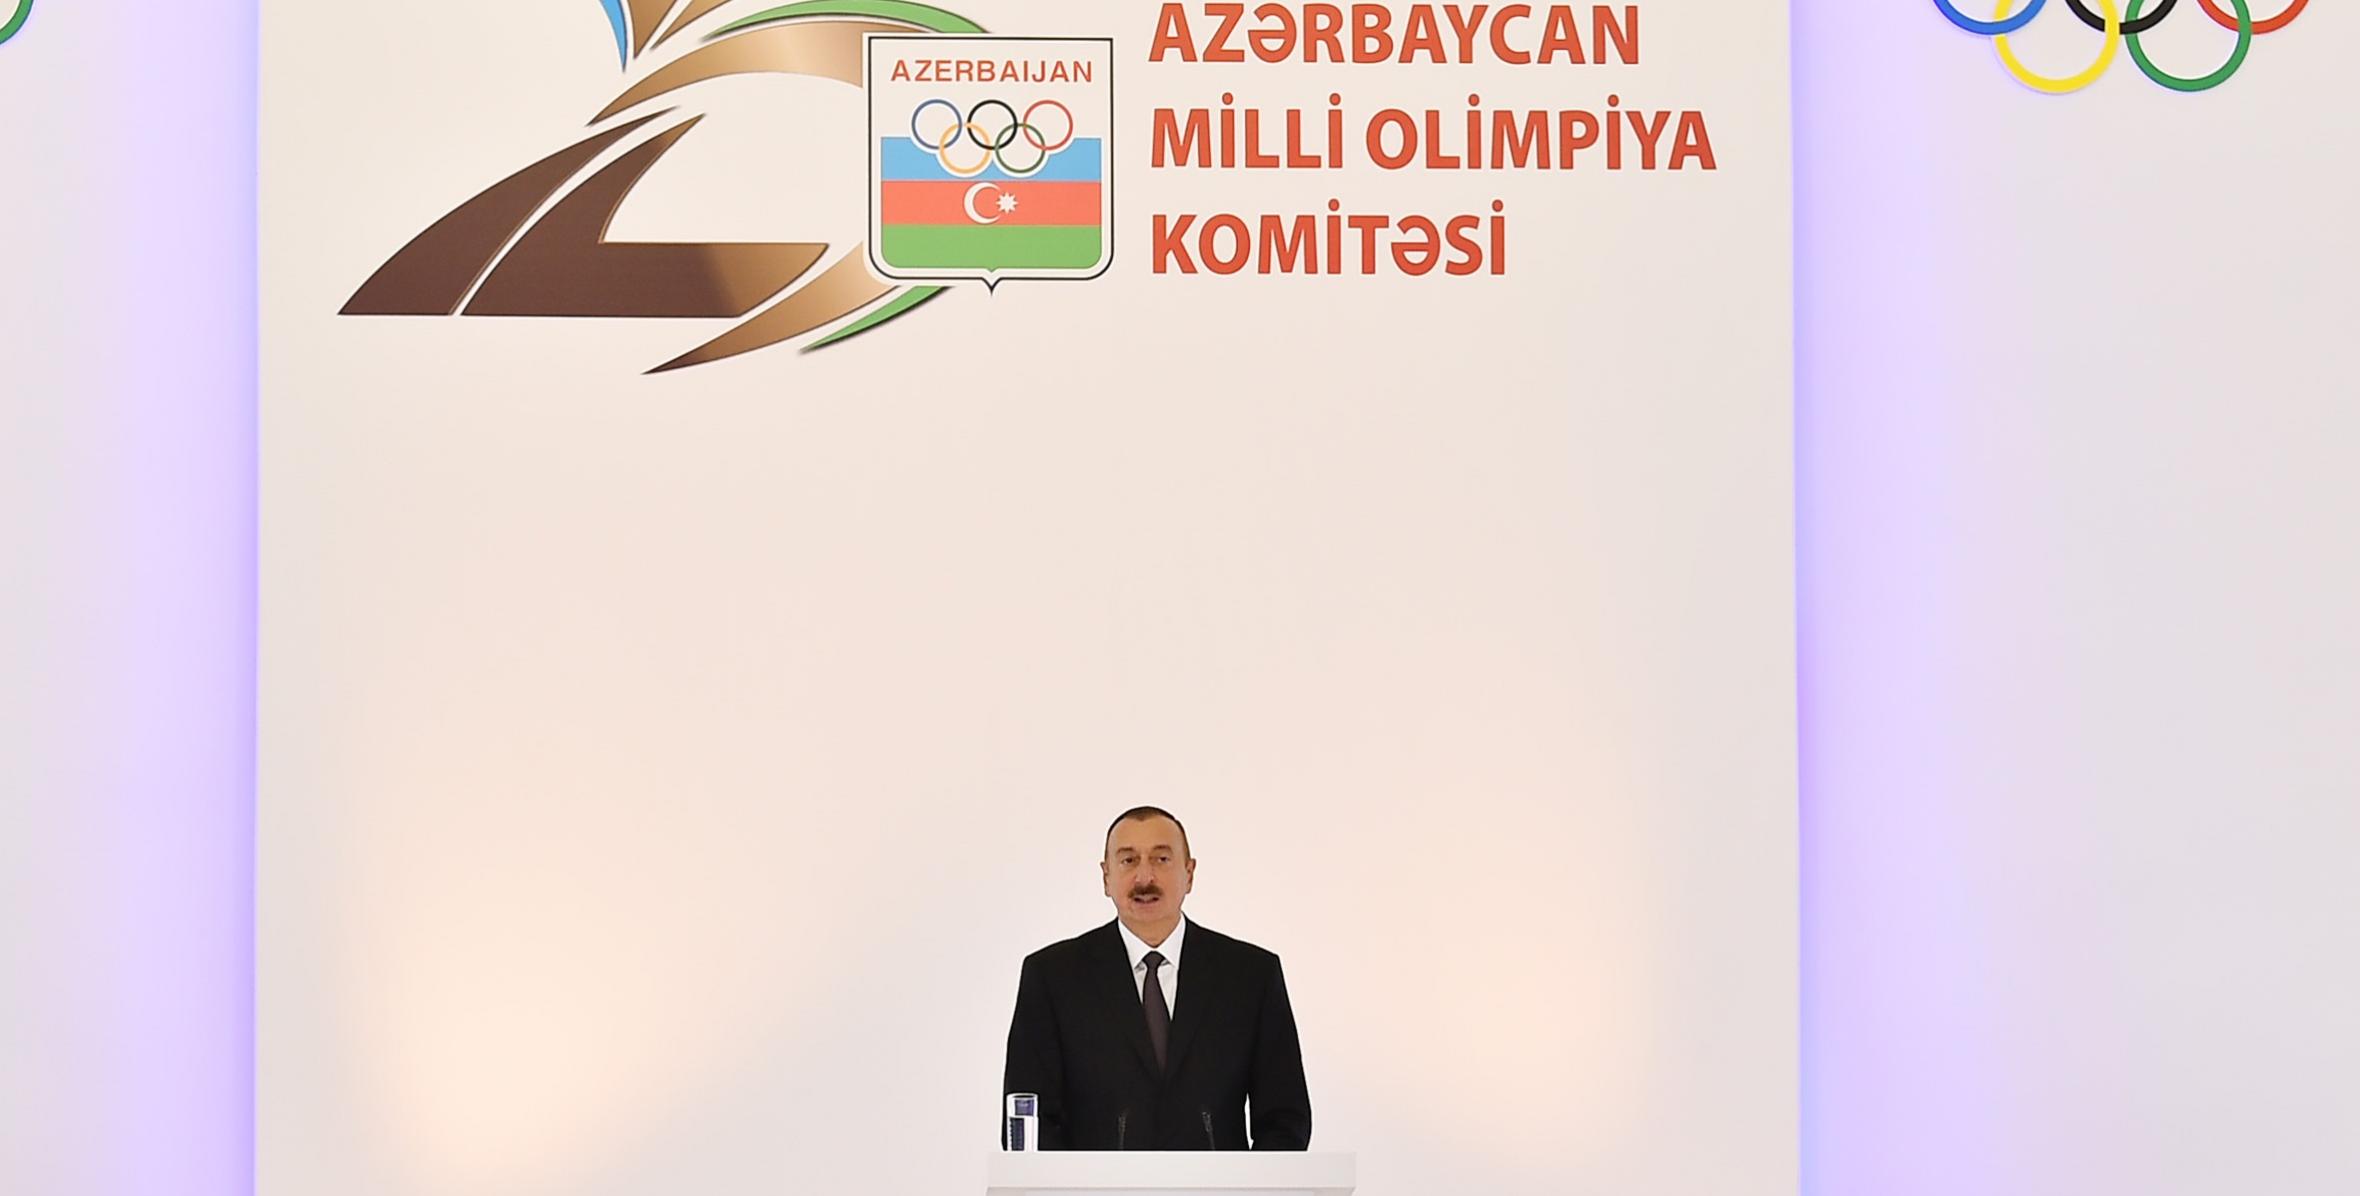 Speech by Ilham Aliyev at  the solemn ceremony on 25th jubilee of Azerbaijan National Olympic Committe